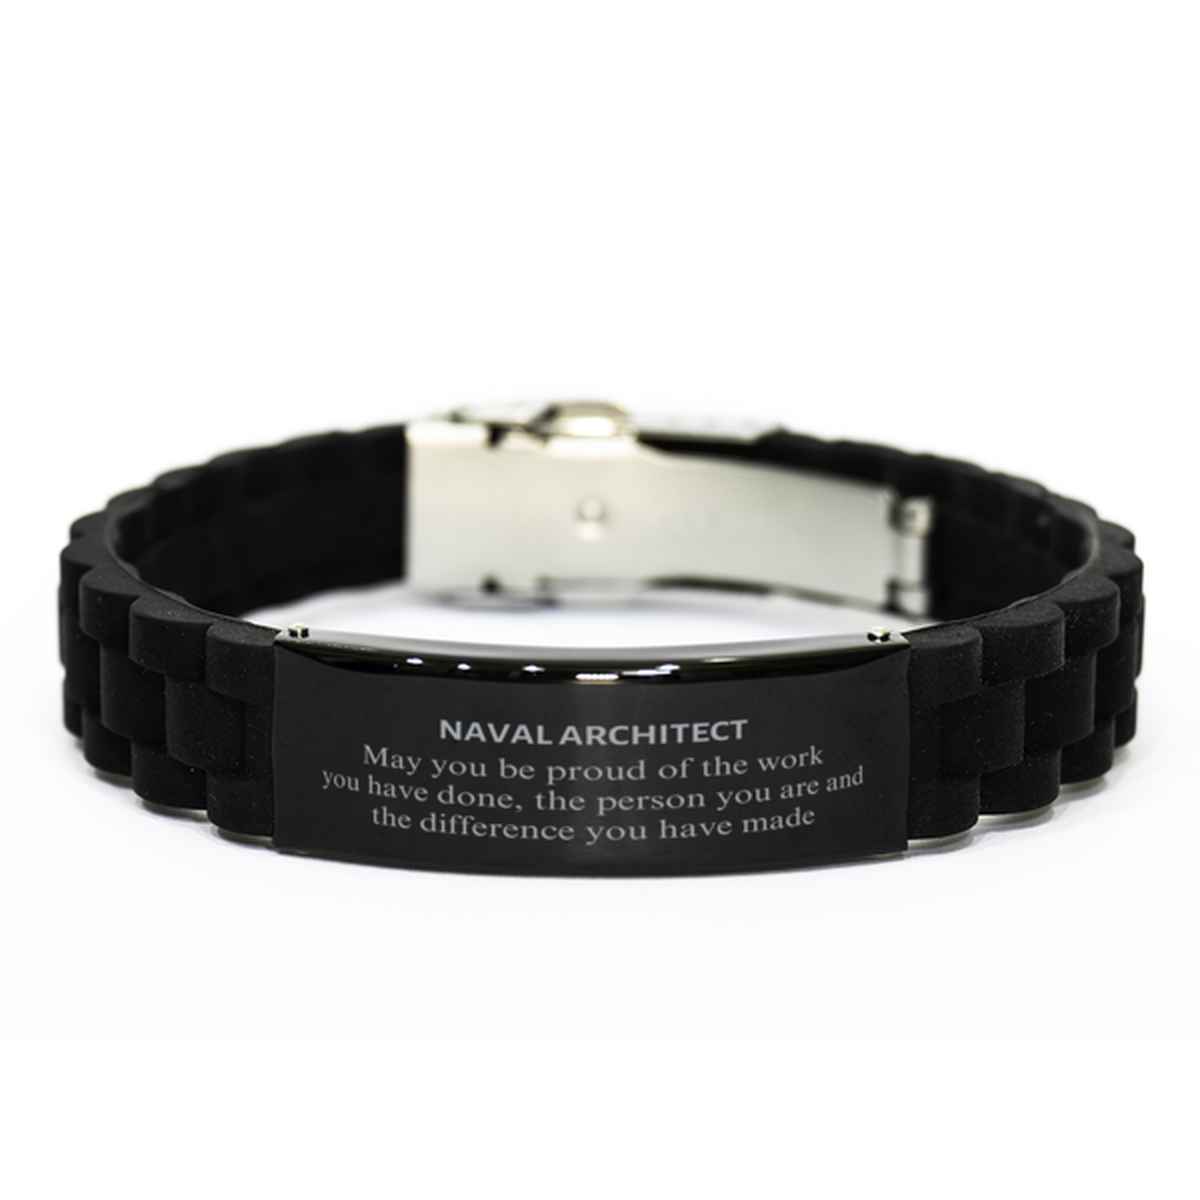 Naval Architect May you be proud of the work you have done, Retirement Naval Architect Black Glidelock Clasp Bracelet for Colleague Appreciation Gifts Amazing for Naval Architect